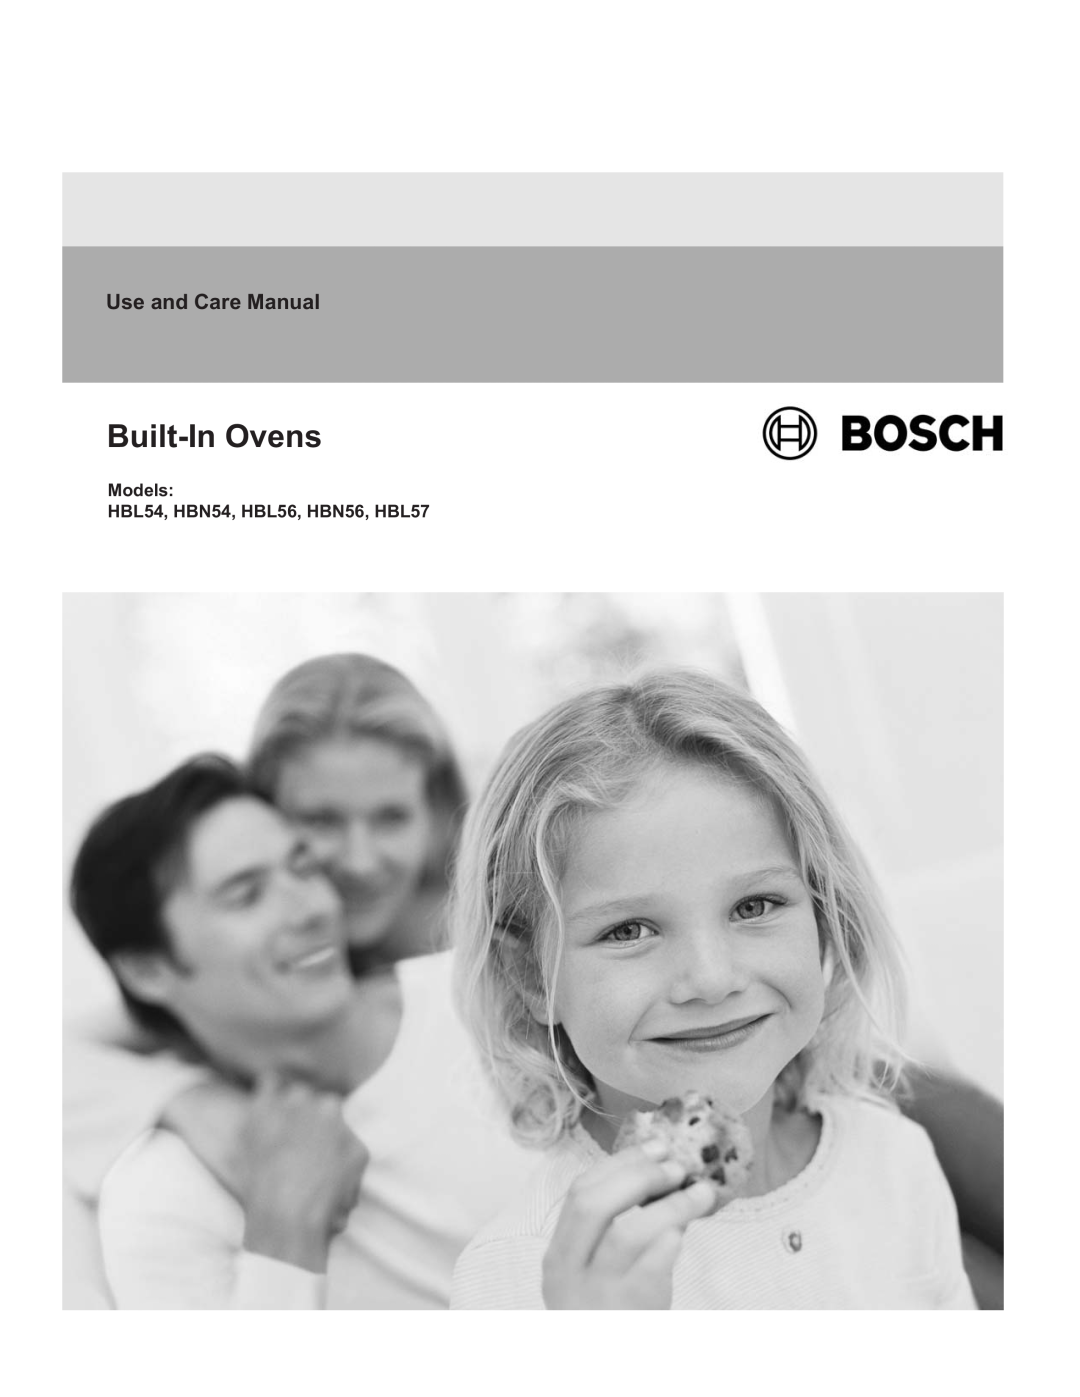 Bosch Appliances manual Built-InOvens, Use and Care Manual, Models HBL54, HBN54, HBL56, HBN56, HBL57 